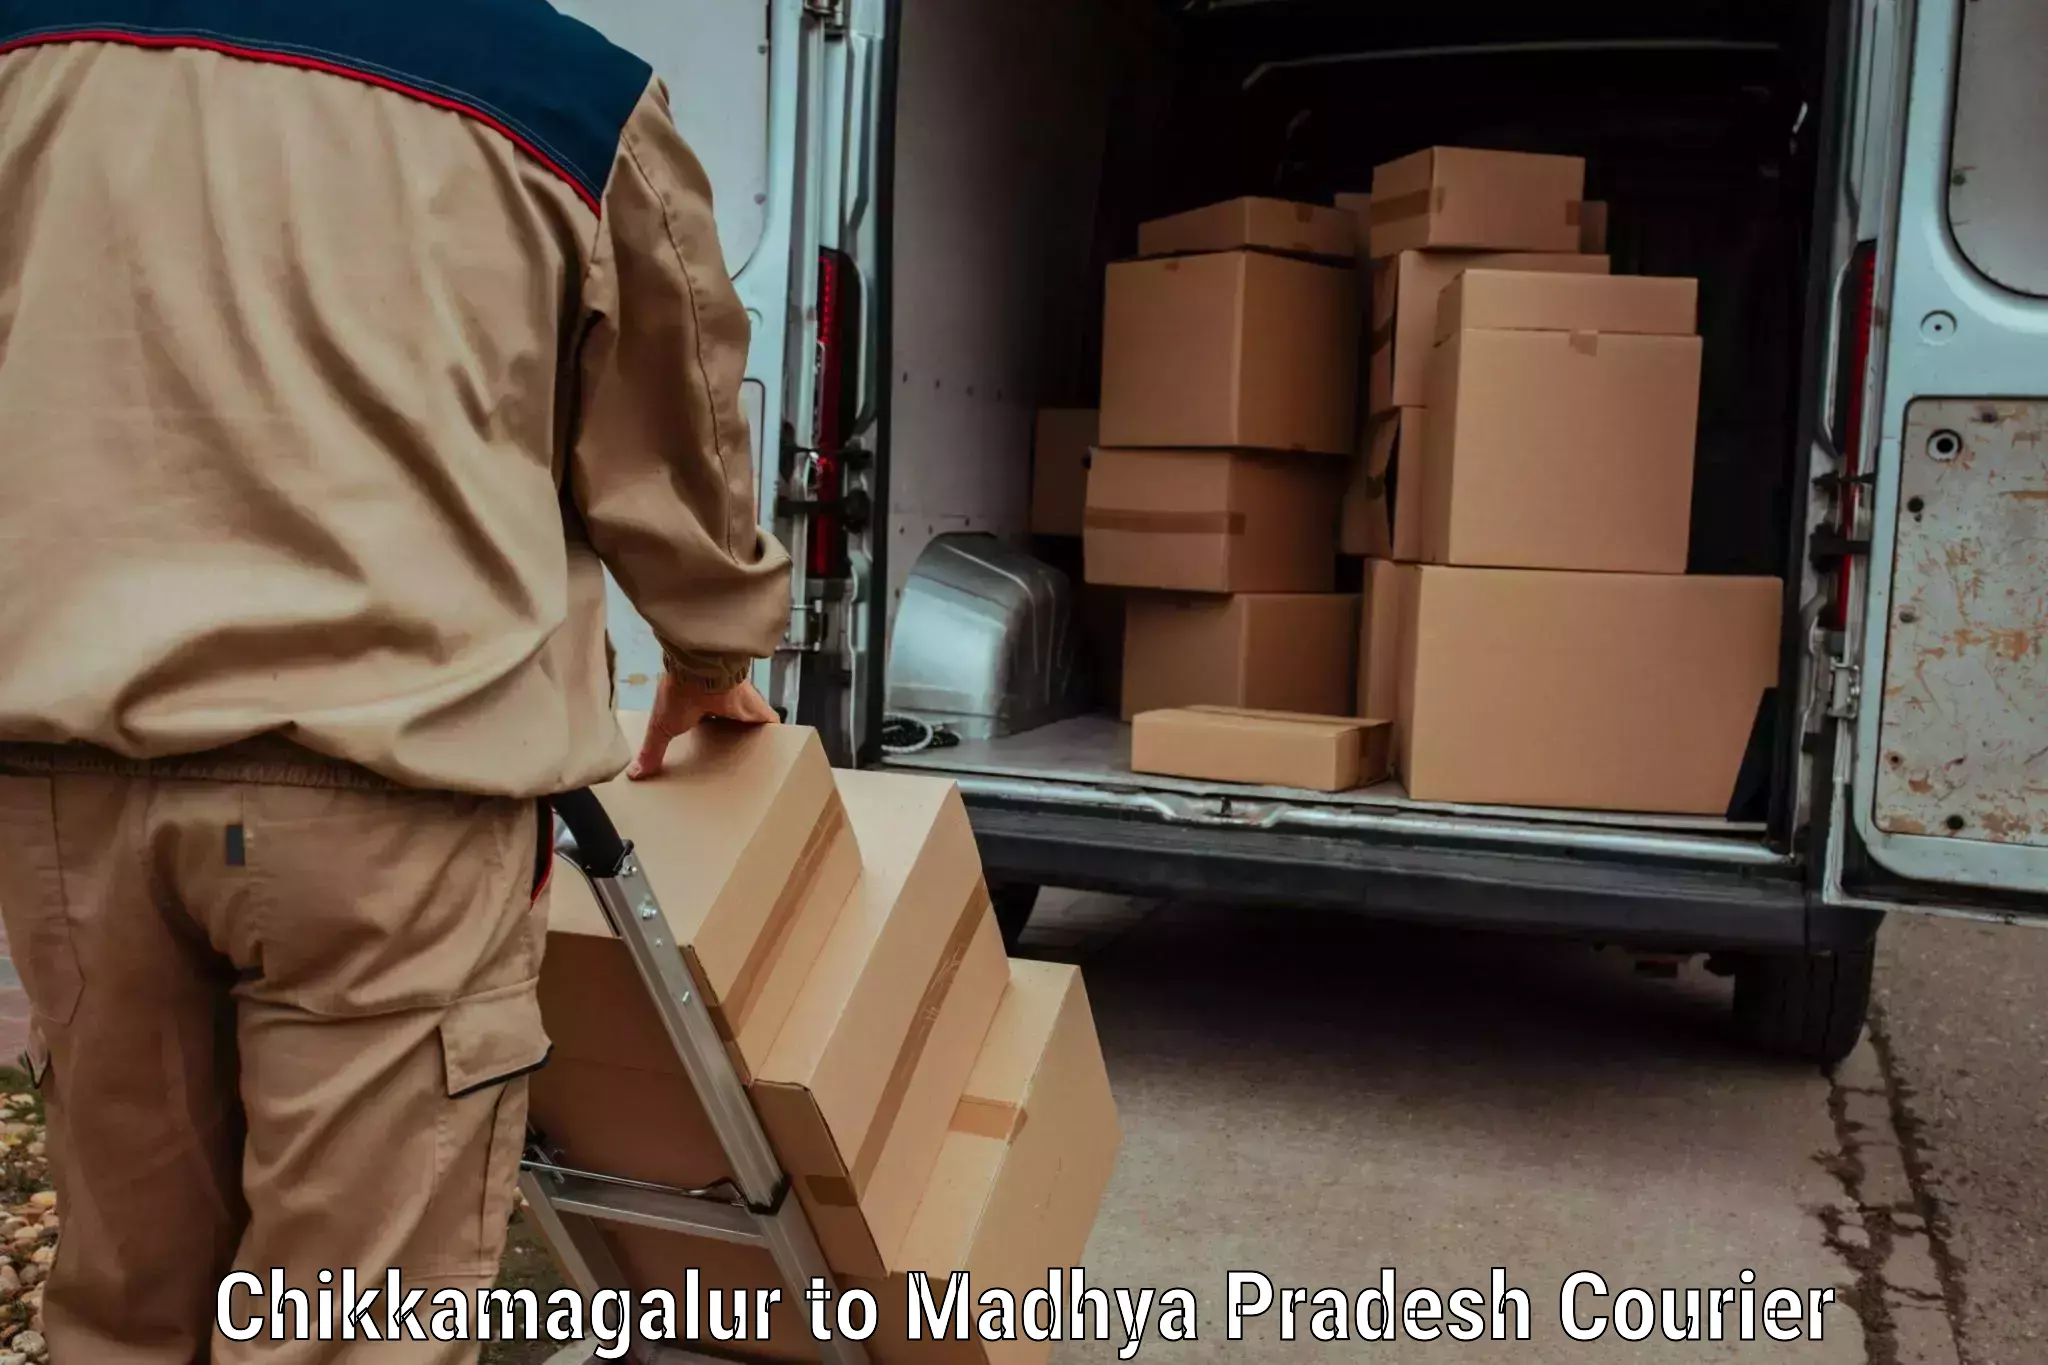 Expedited shipping methods Chikkamagalur to Madwas